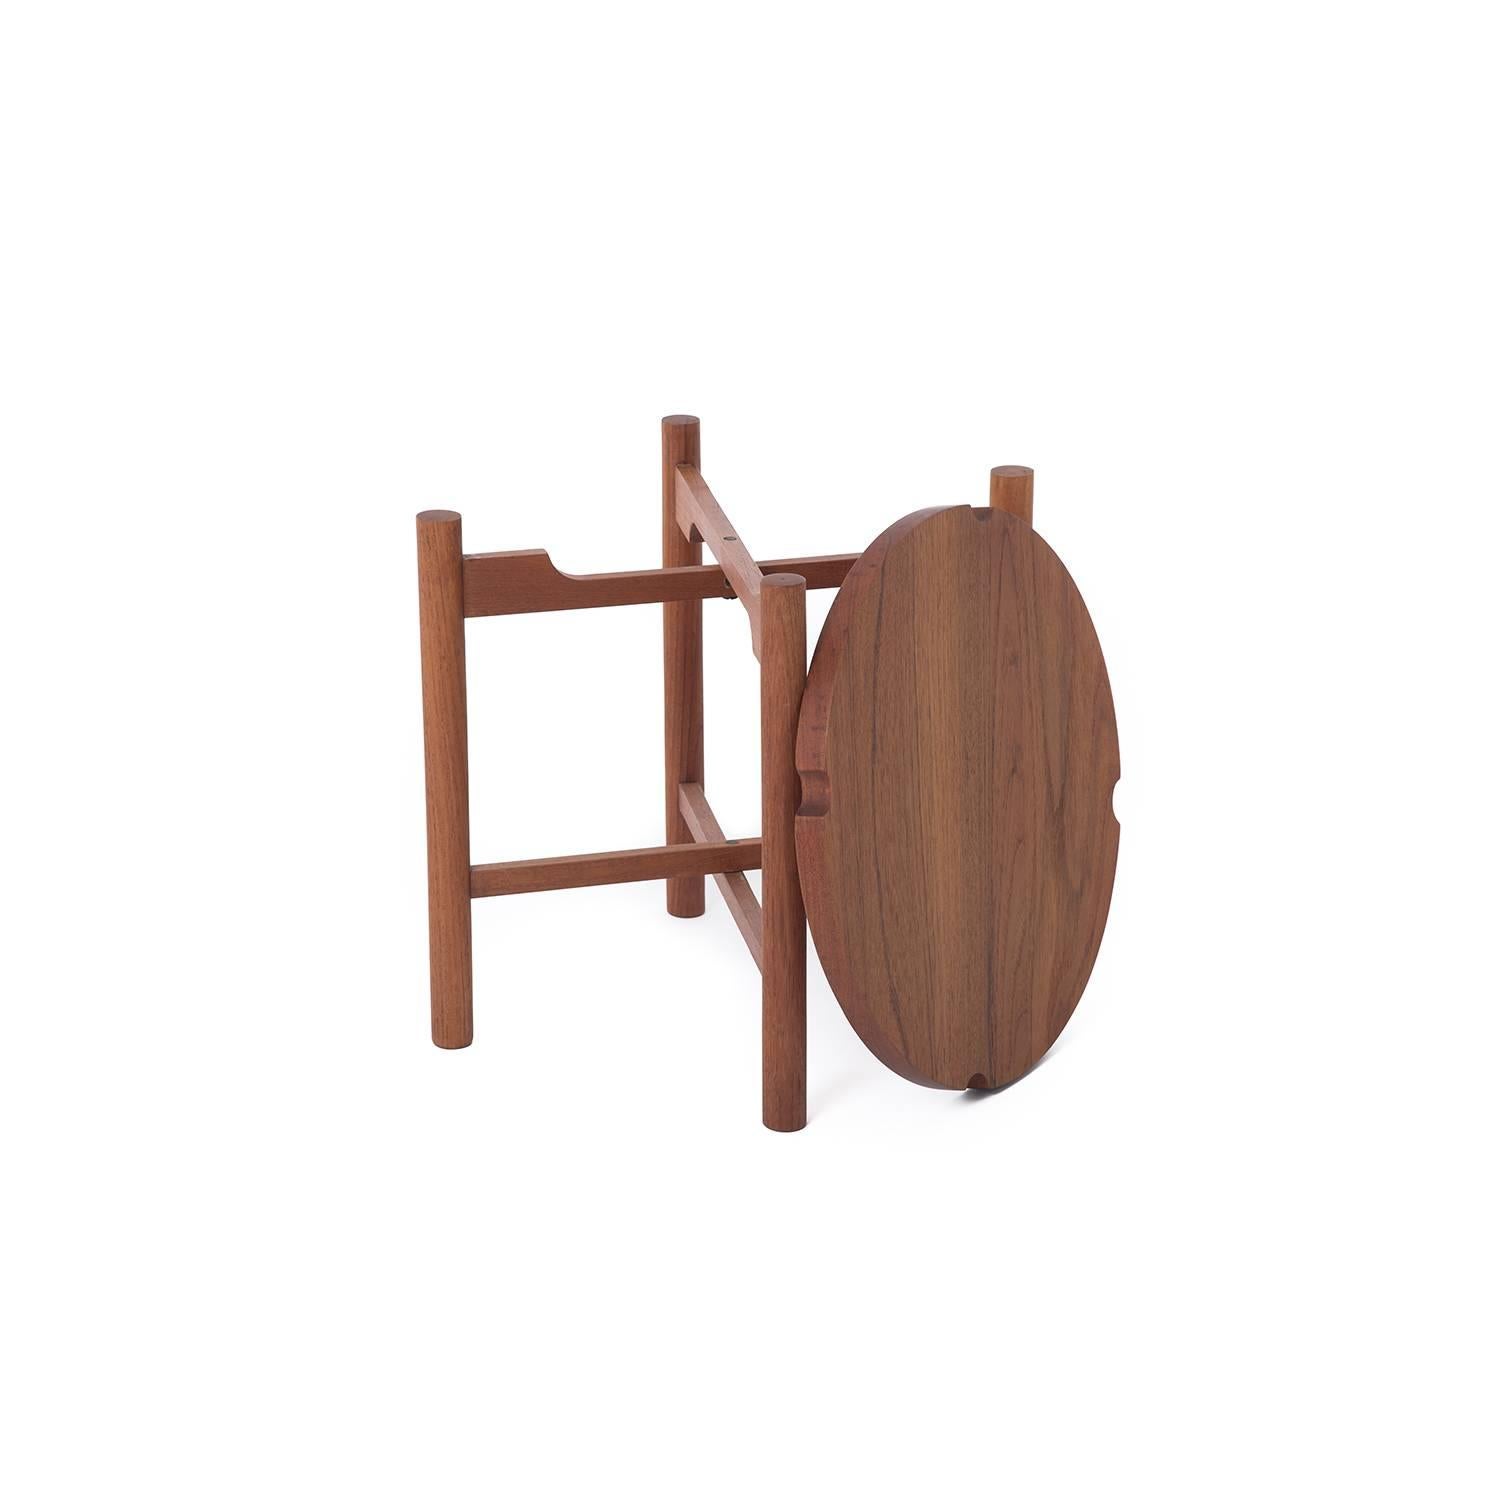 With a removable teak top and folding teak base, this table is a breeze to store and transport.